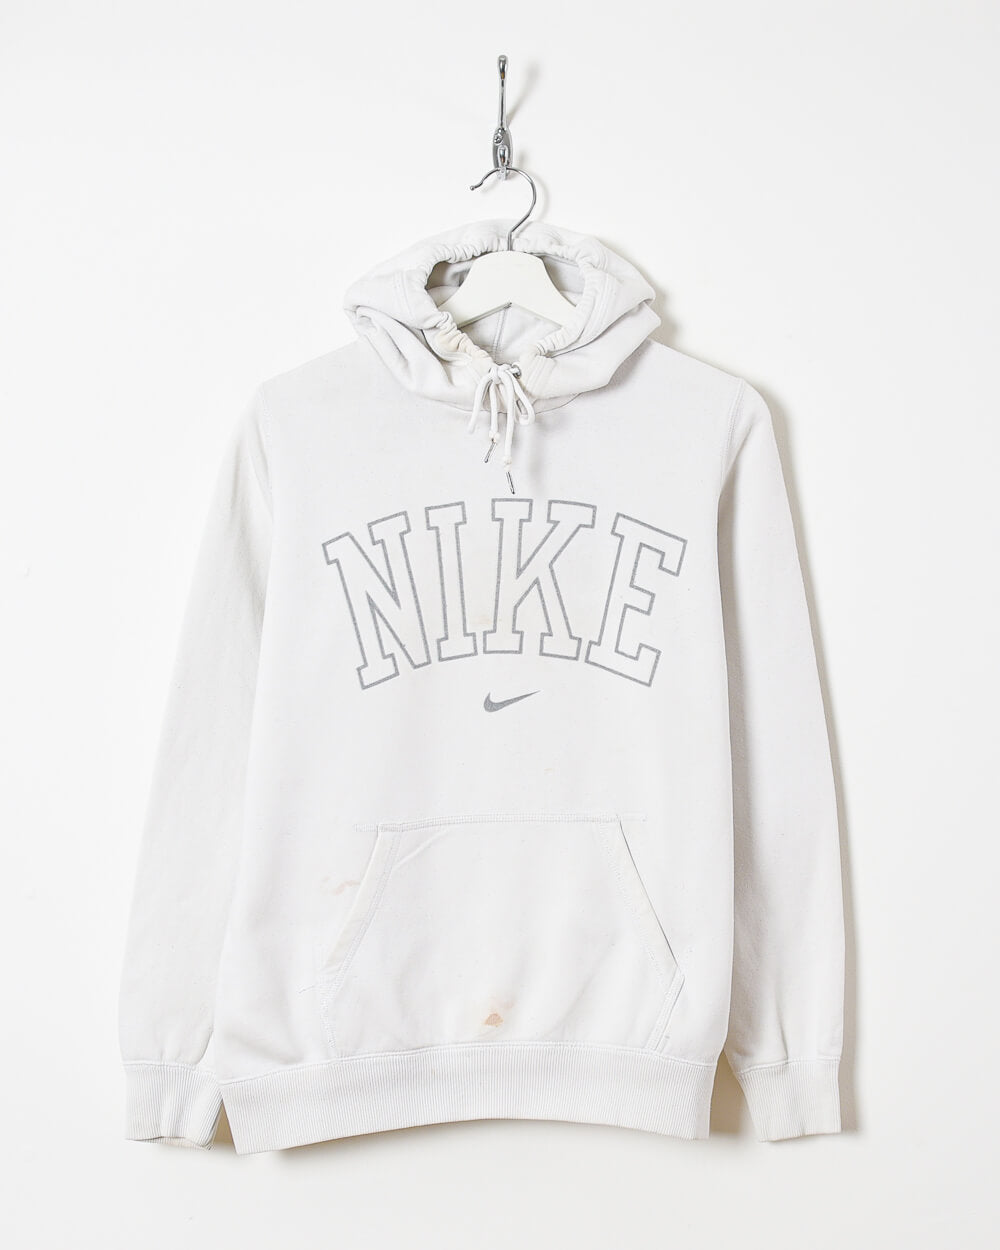 Nike Women's Hoodie - Large - Domno Vintage 90s, 80s, 00s Retro and Vintage Clothing 